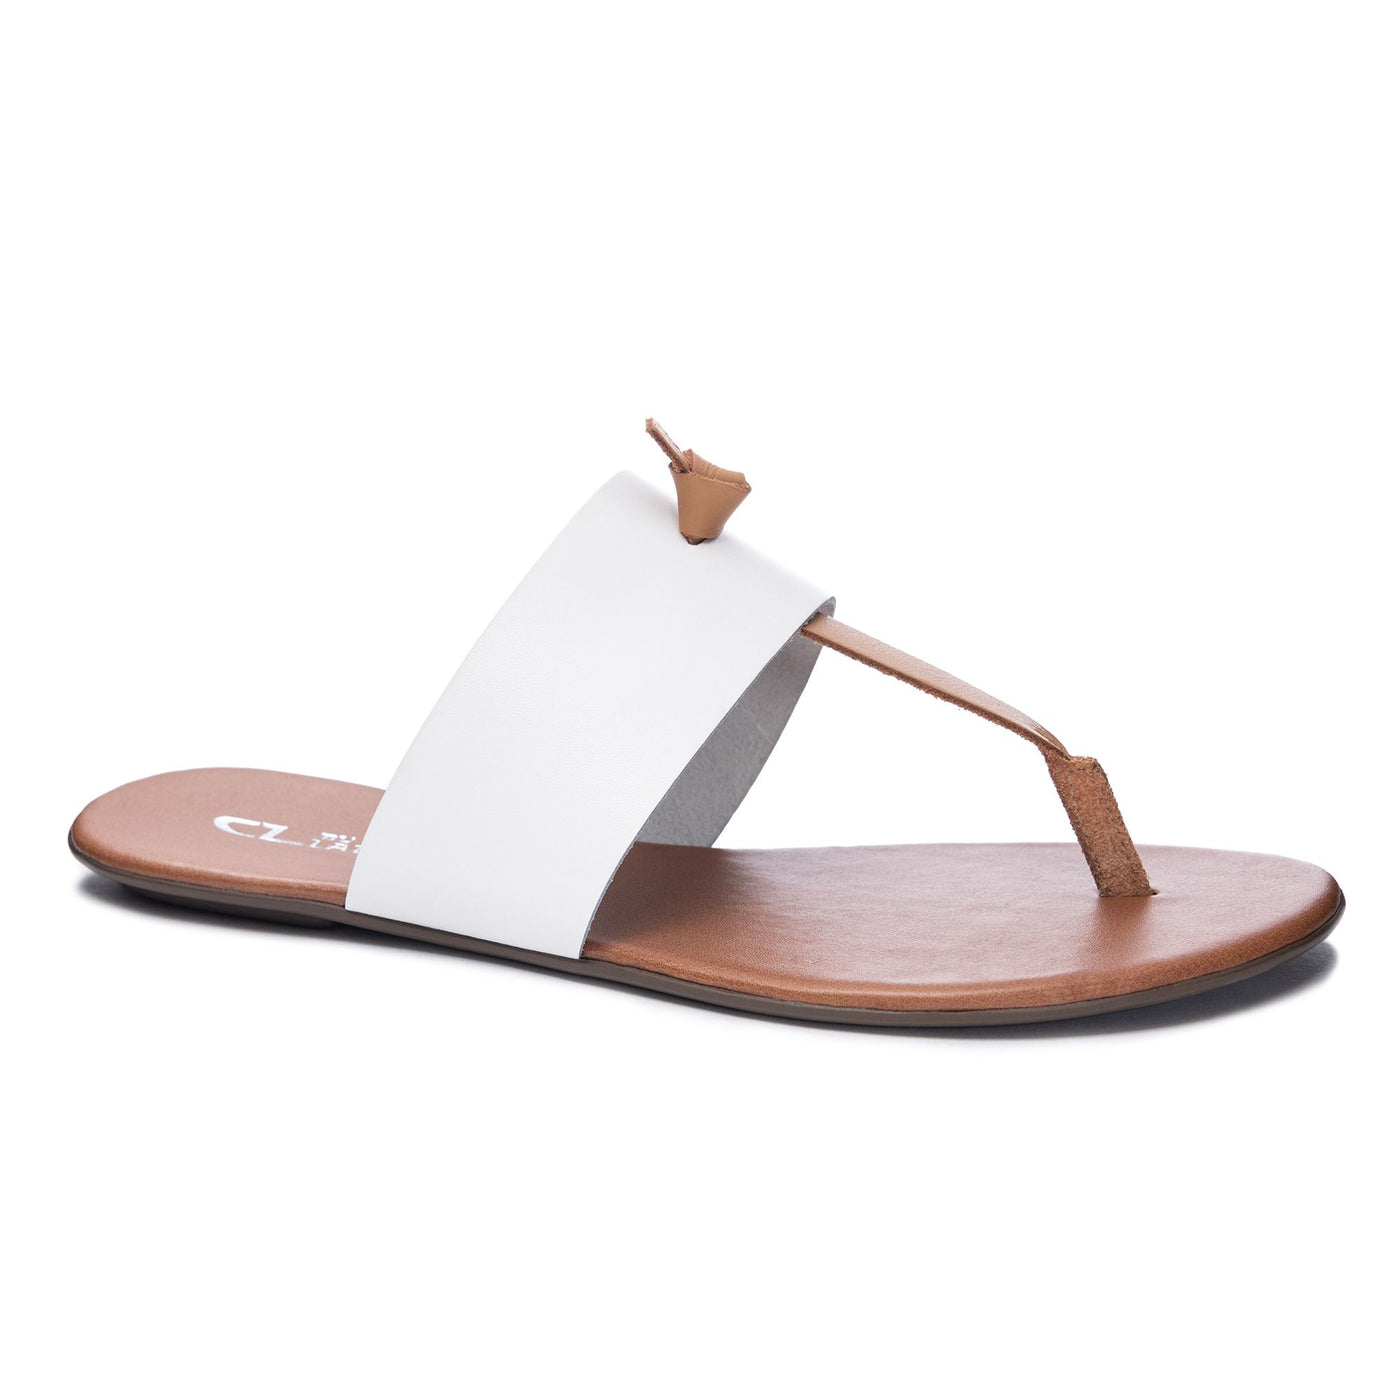 Chinese Laundry Admire Natural Leather Sandals